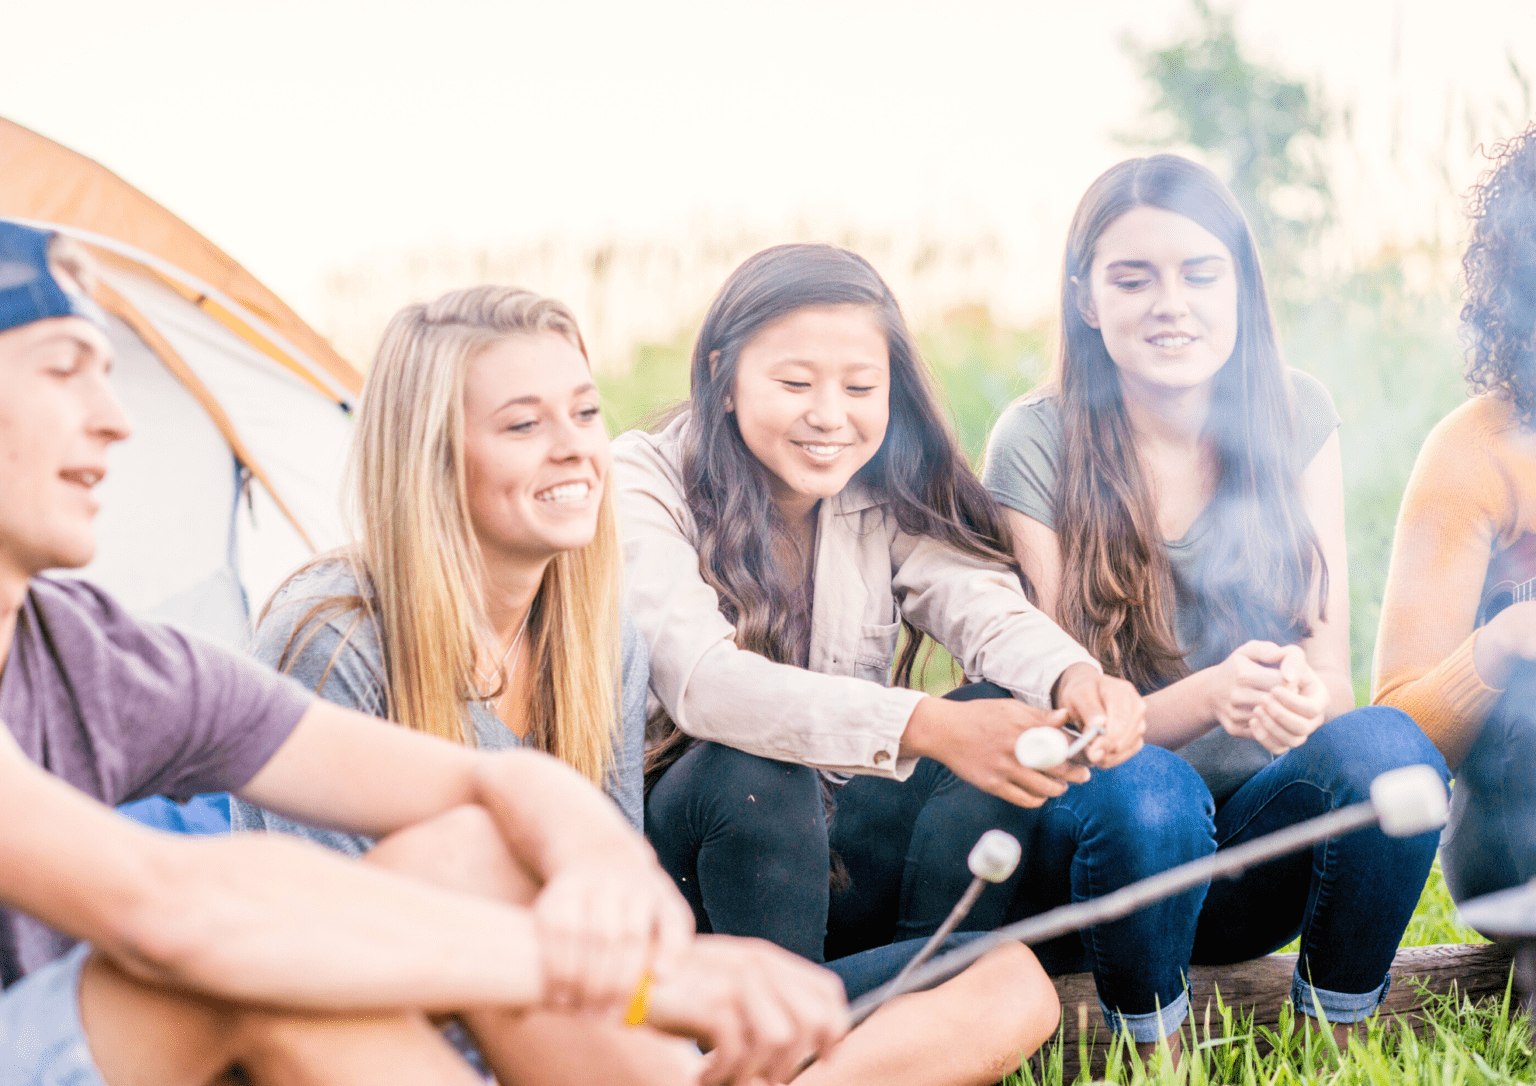 The image shows a group of people smiling sitting outdoors roasting marshmallows.